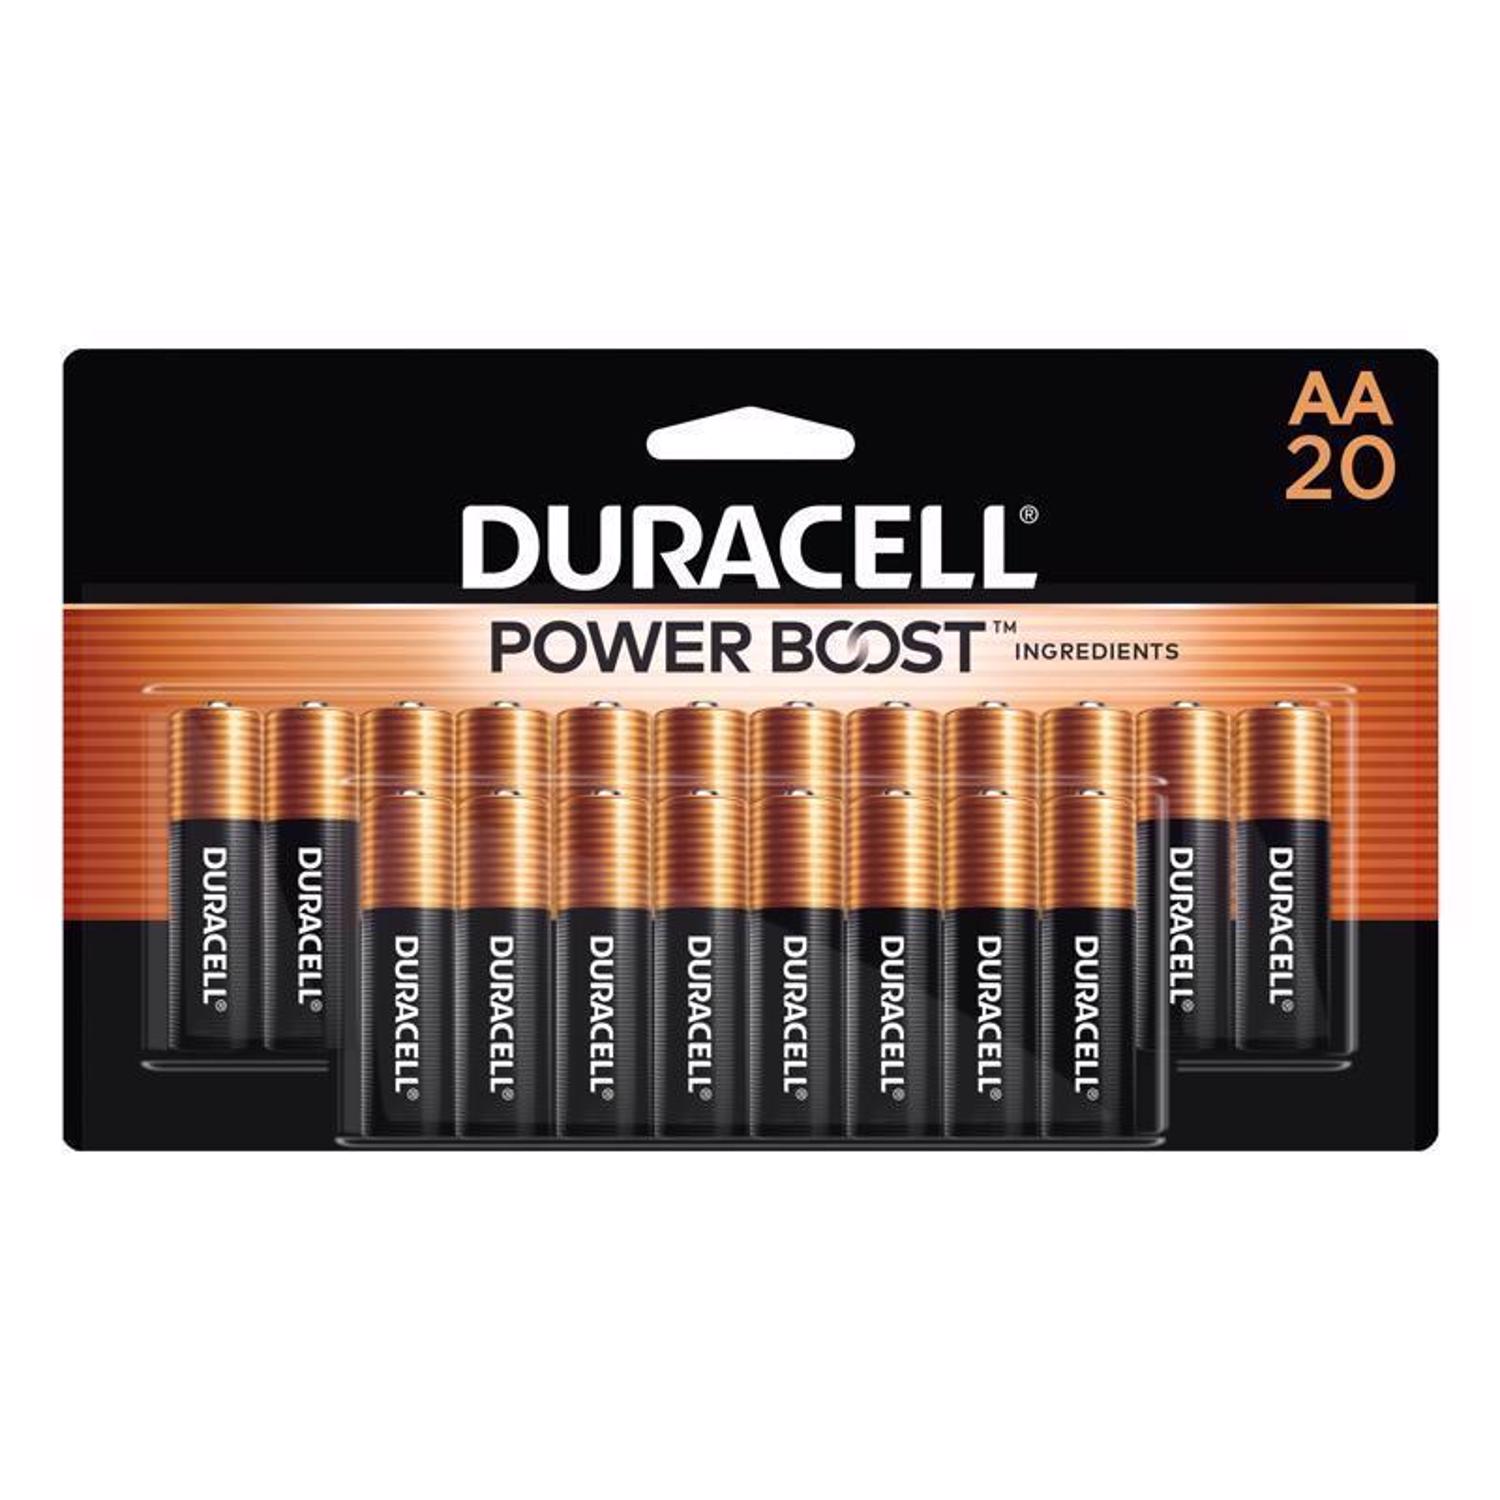 Photos - Household Switch Duracell Coppertop AA Alkaline Batteries 20 pk Carded MN1500B20 